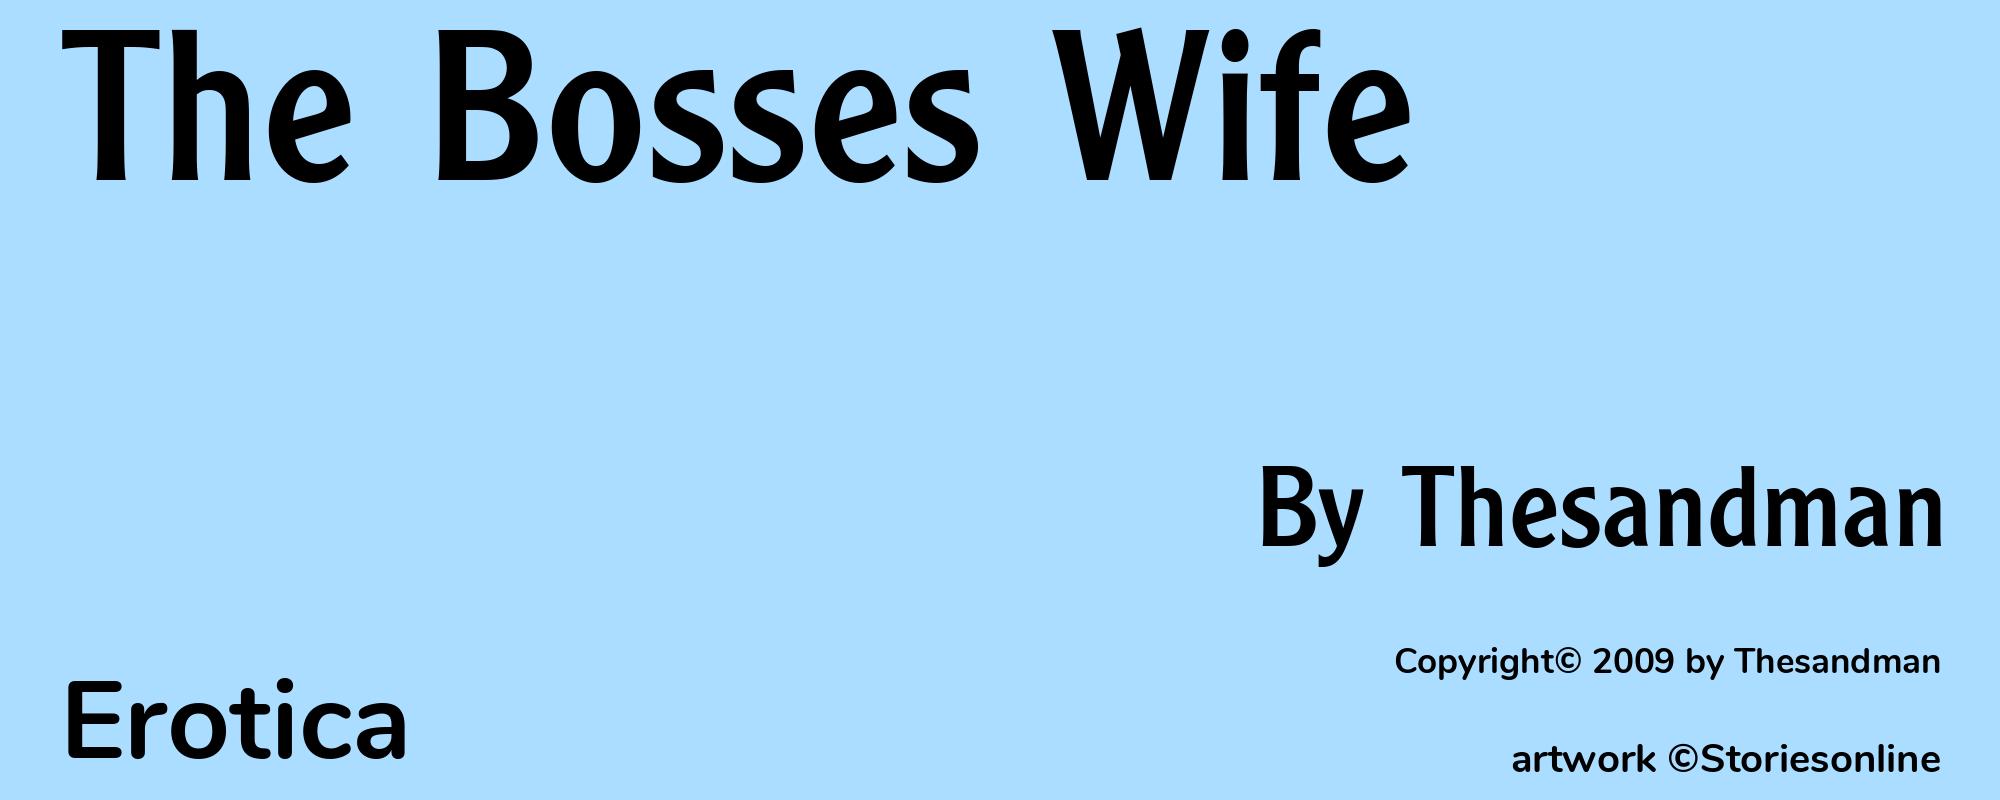 The Bosses Wife - Cover